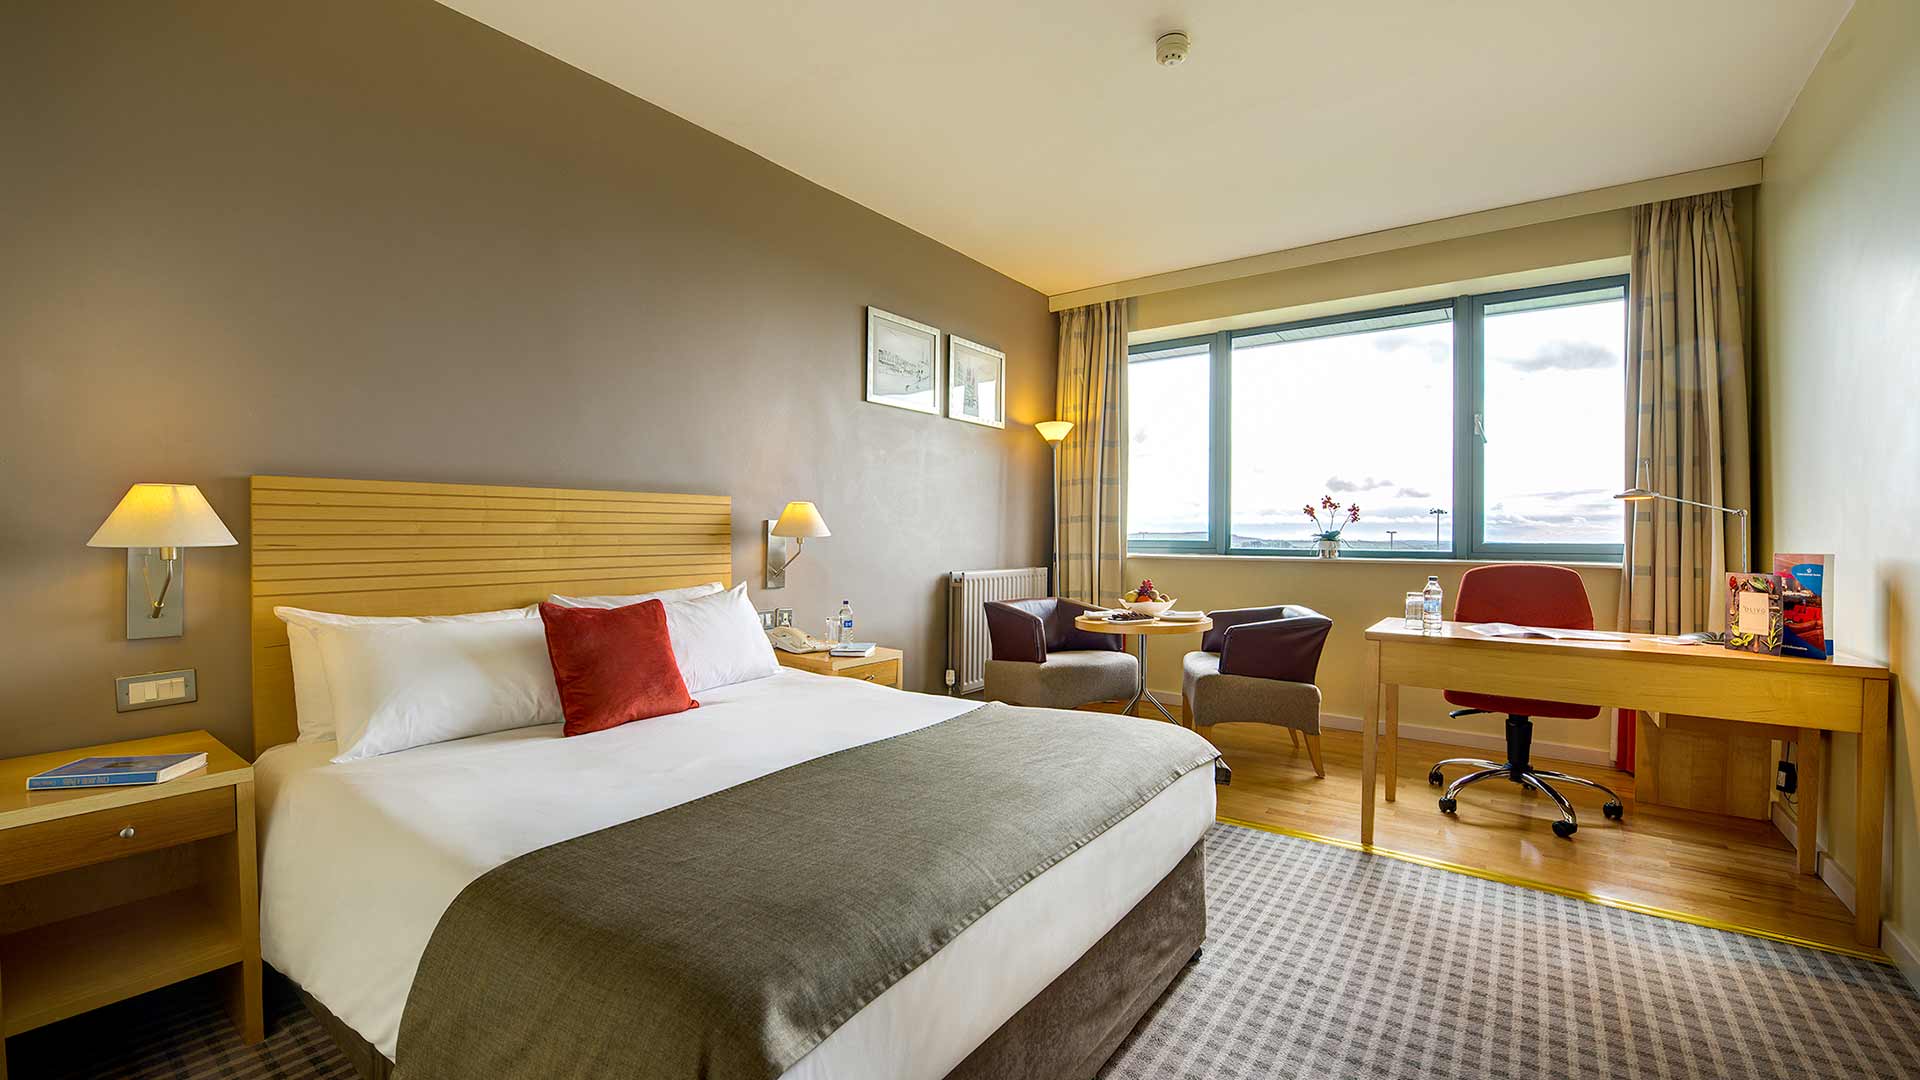 Double room at Cork Airport Hotel including comfy double bed, seating area and desk